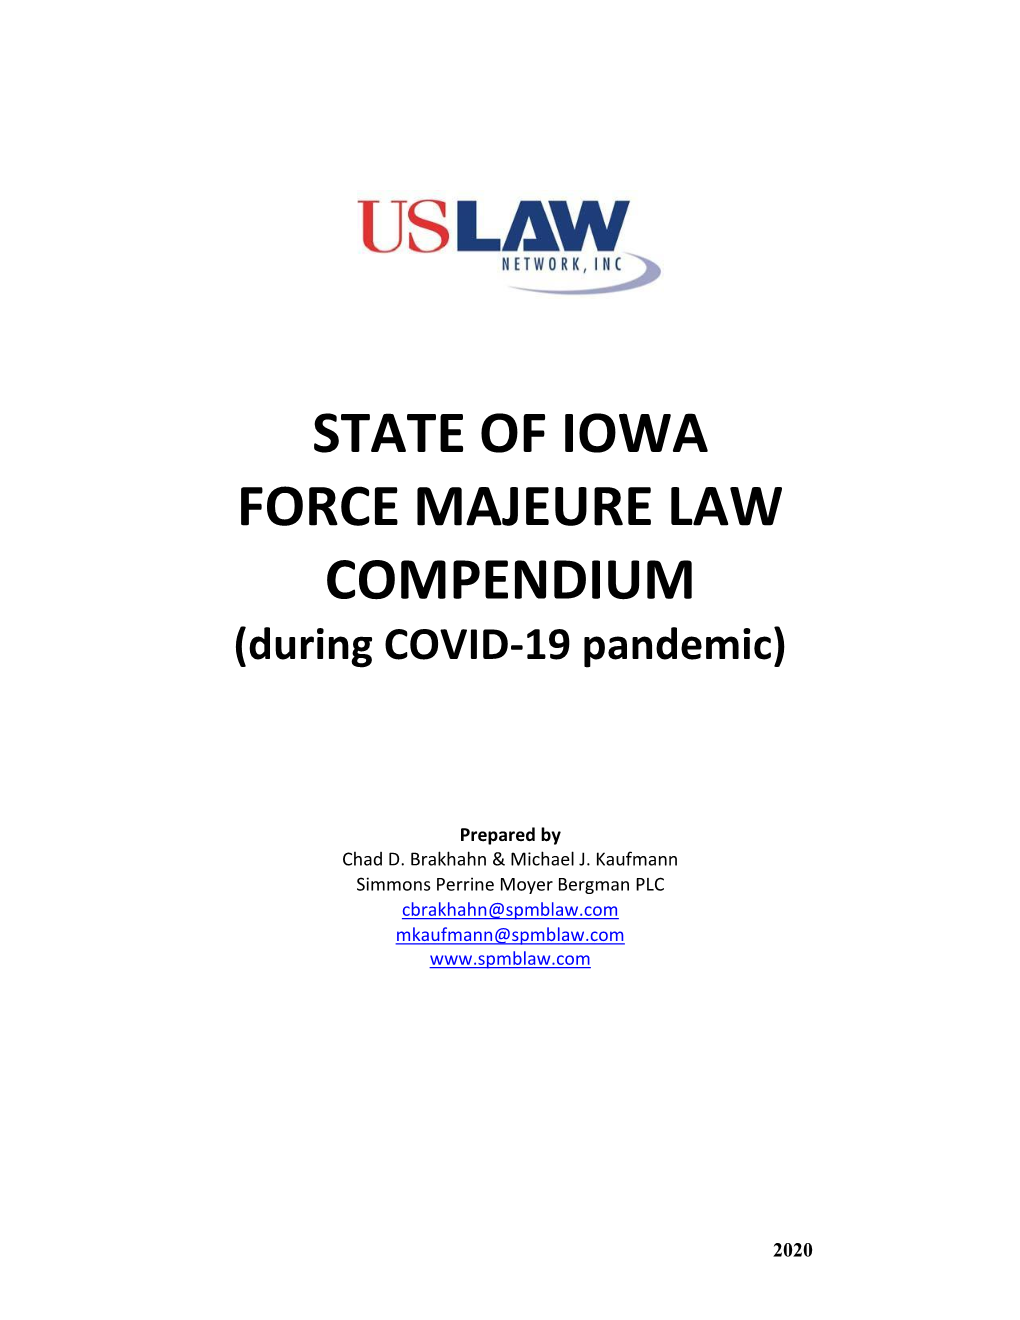 STATE of IOWA FORCE MAJEURE LAW COMPENDIUM (During COVID-19 Pandemic)